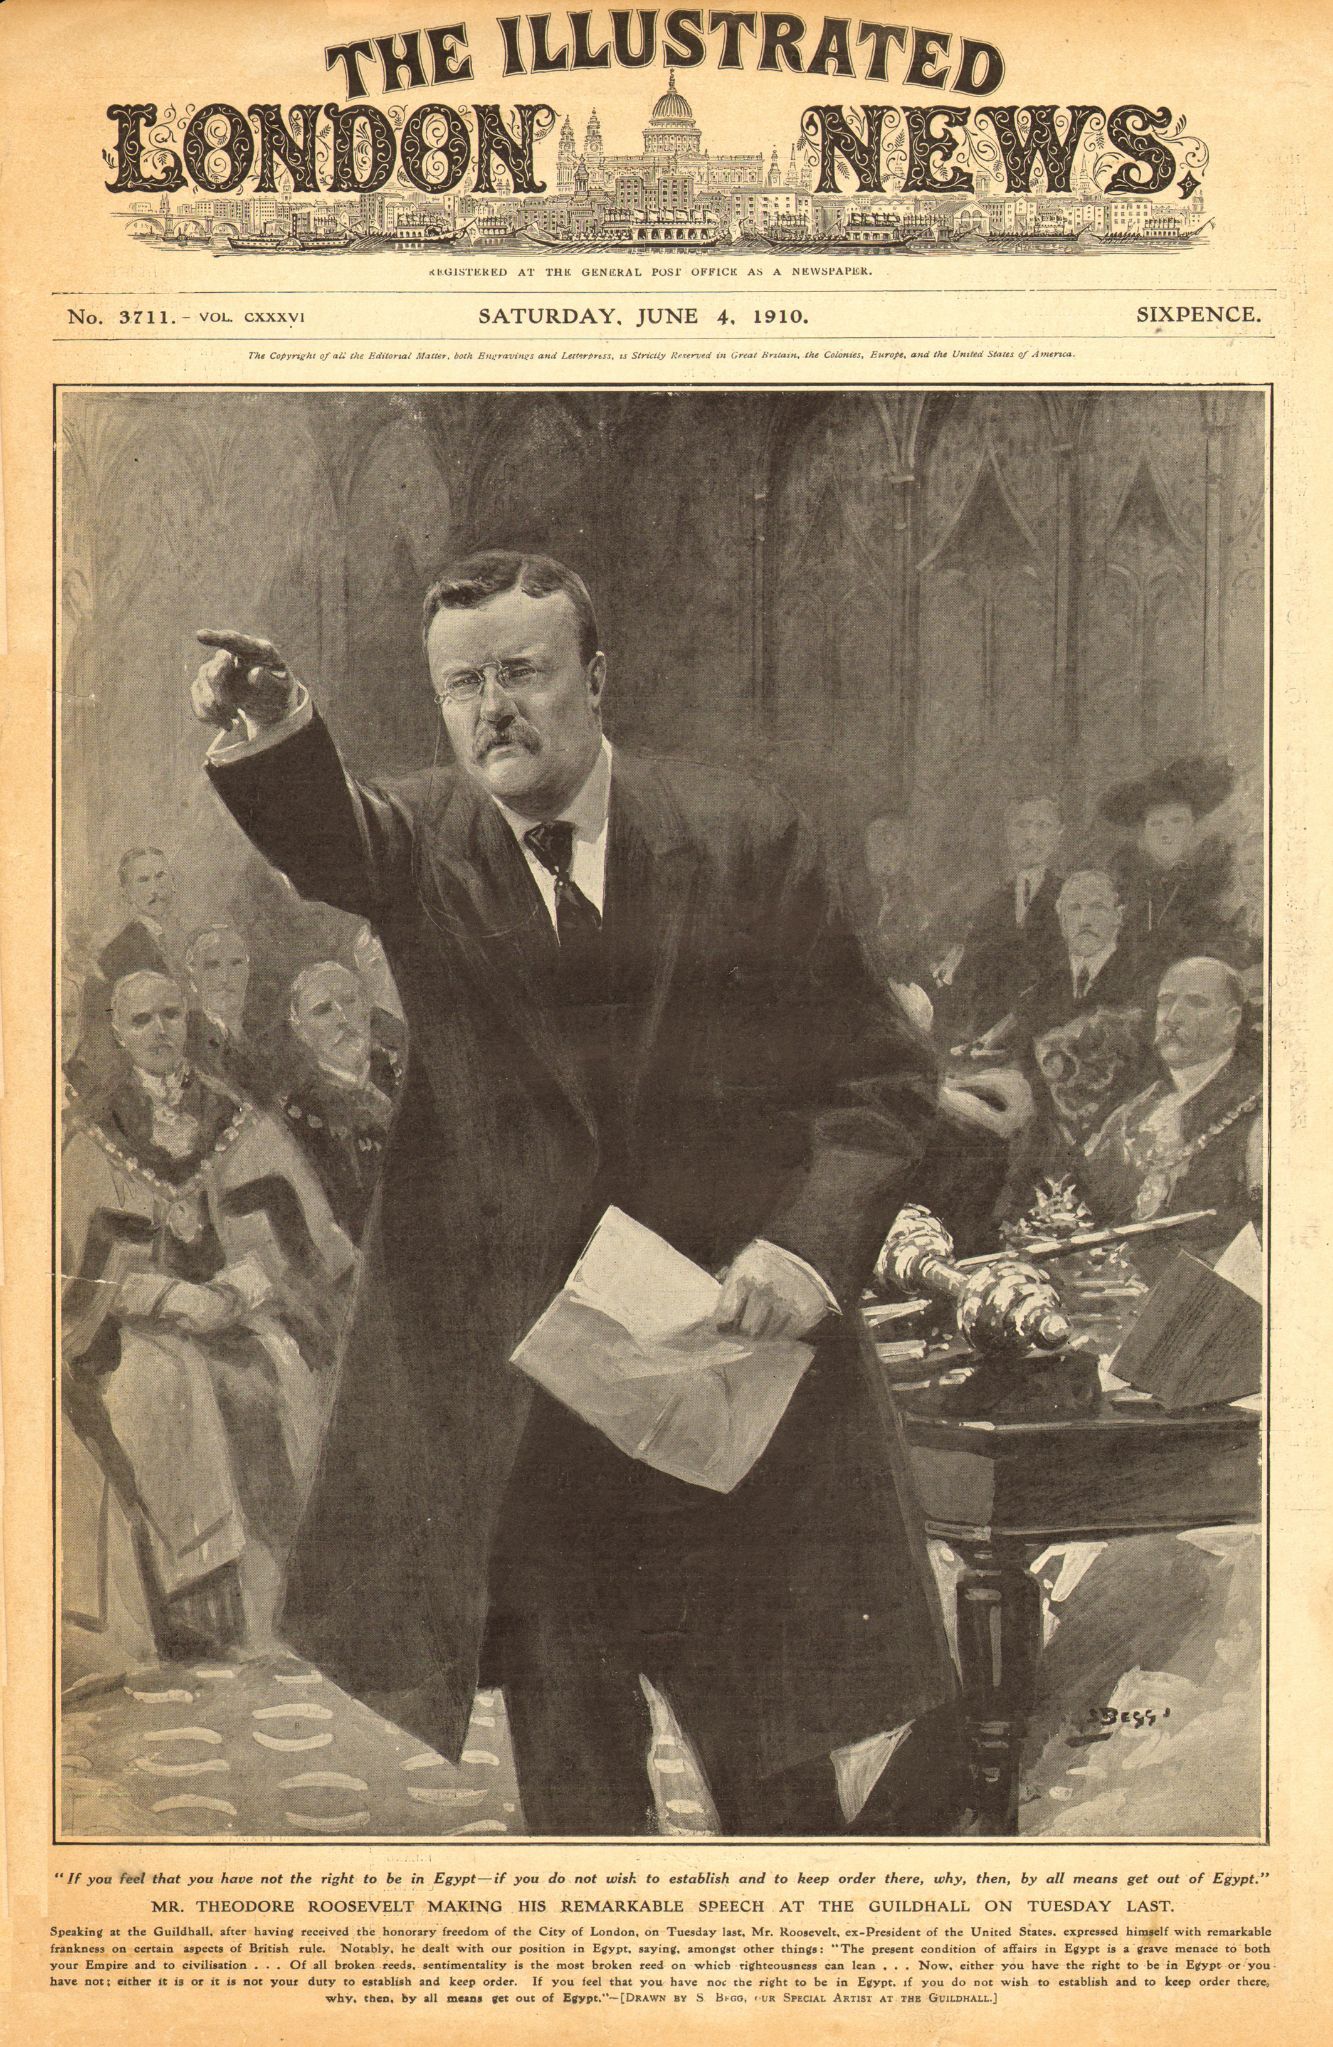 The front page of the 1910 Illustrated London News, featuring US President Theodore Roosevelt speaking at the Guildhall in London (Alamy)